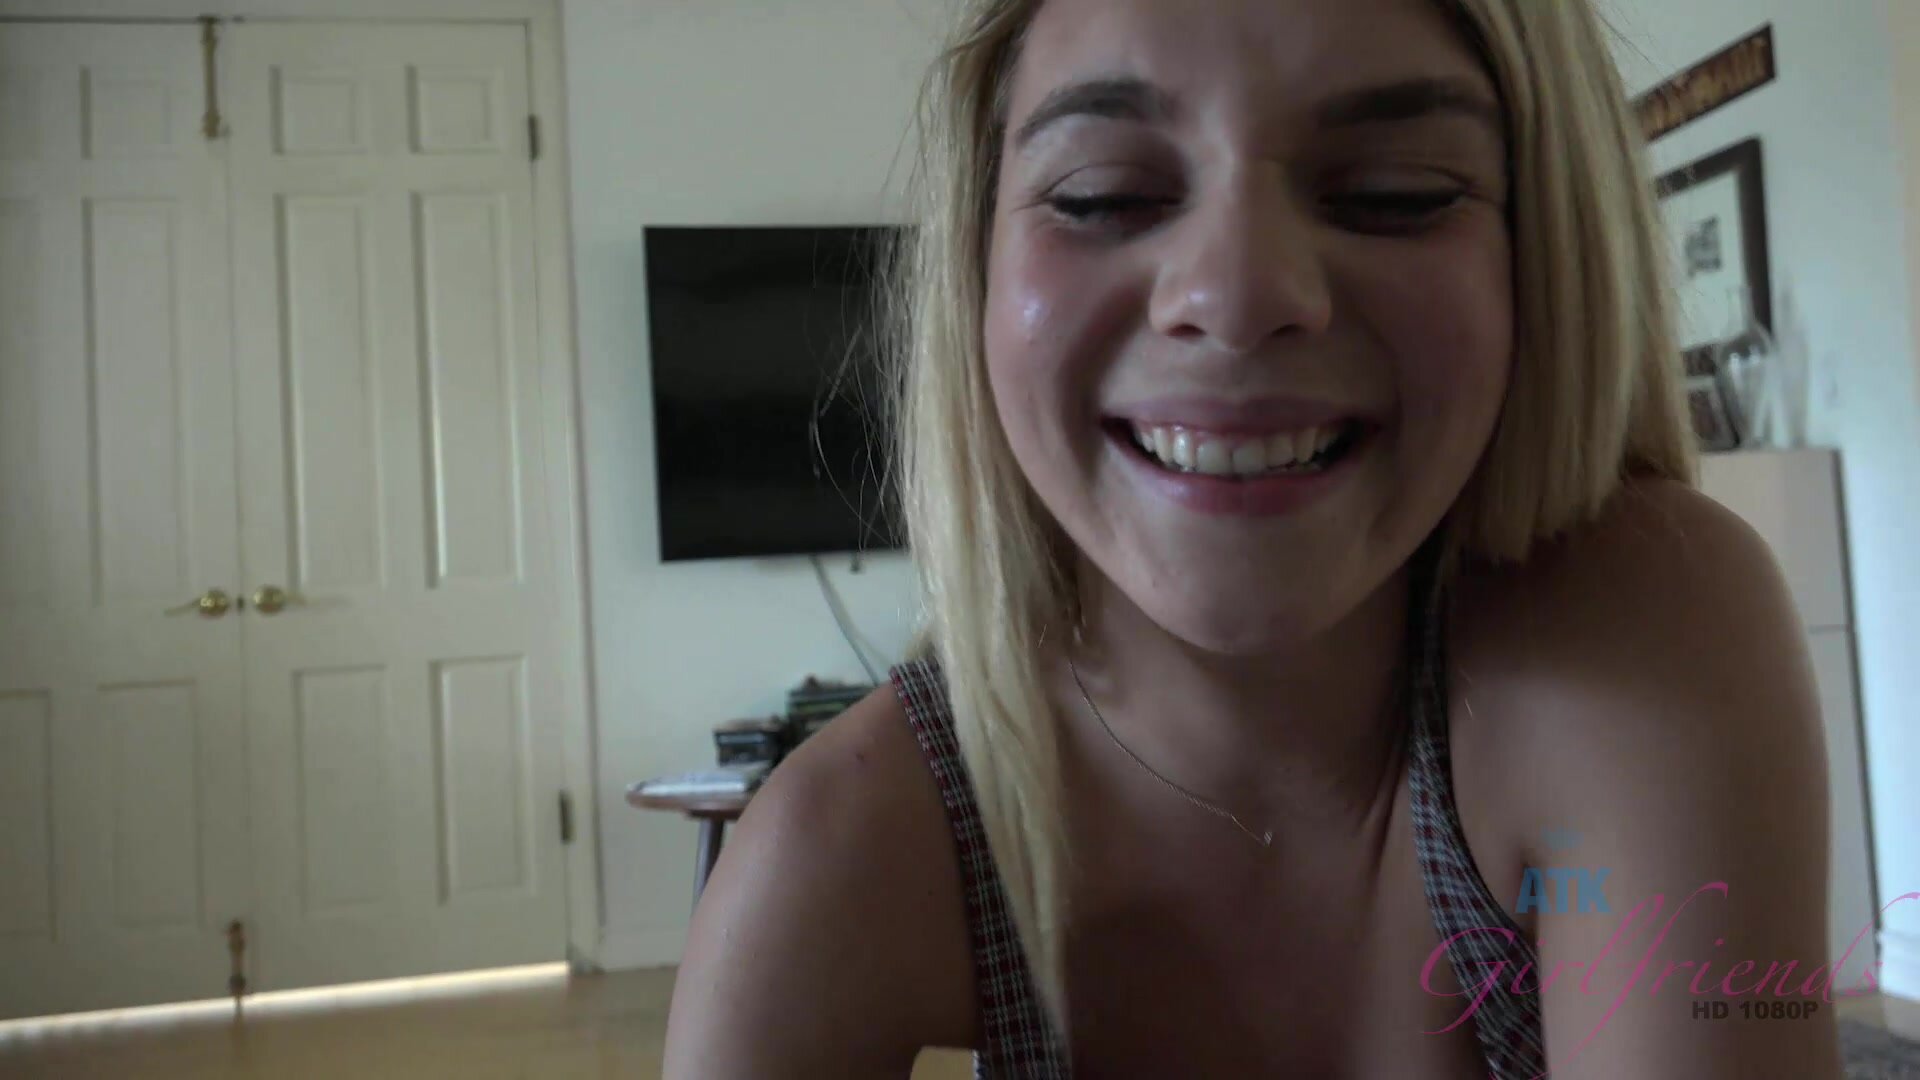 Gabbie Is New  but She Fucks Like an Old Pro